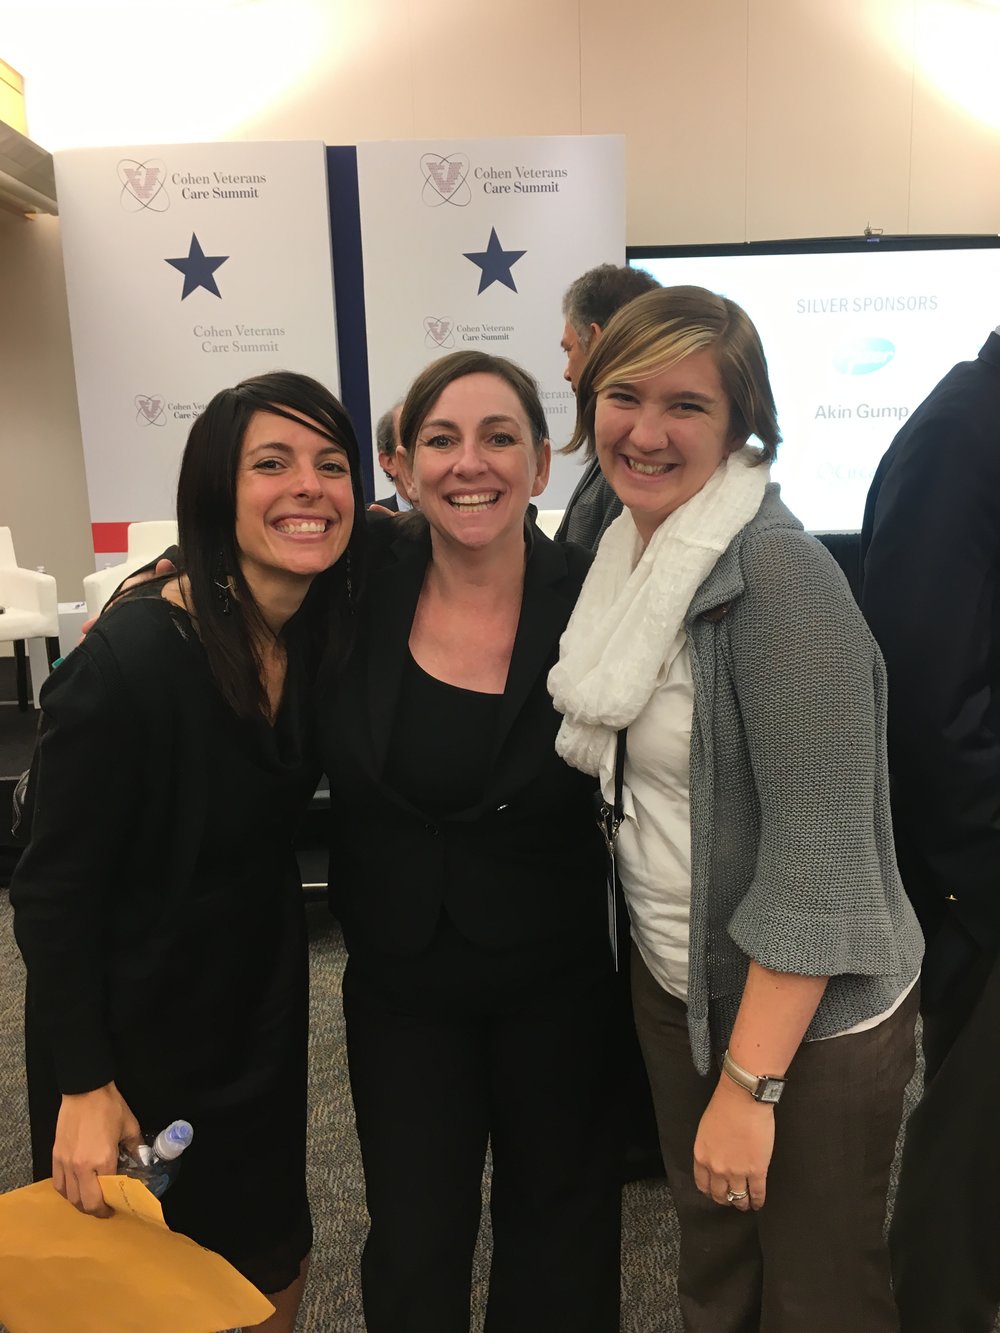  Rinad Beidas, PhD, Leah Blaine, PhD, and Crystal Shelton, MSSW, LCSW, at the 2017 Cohen Veterans Care Summit